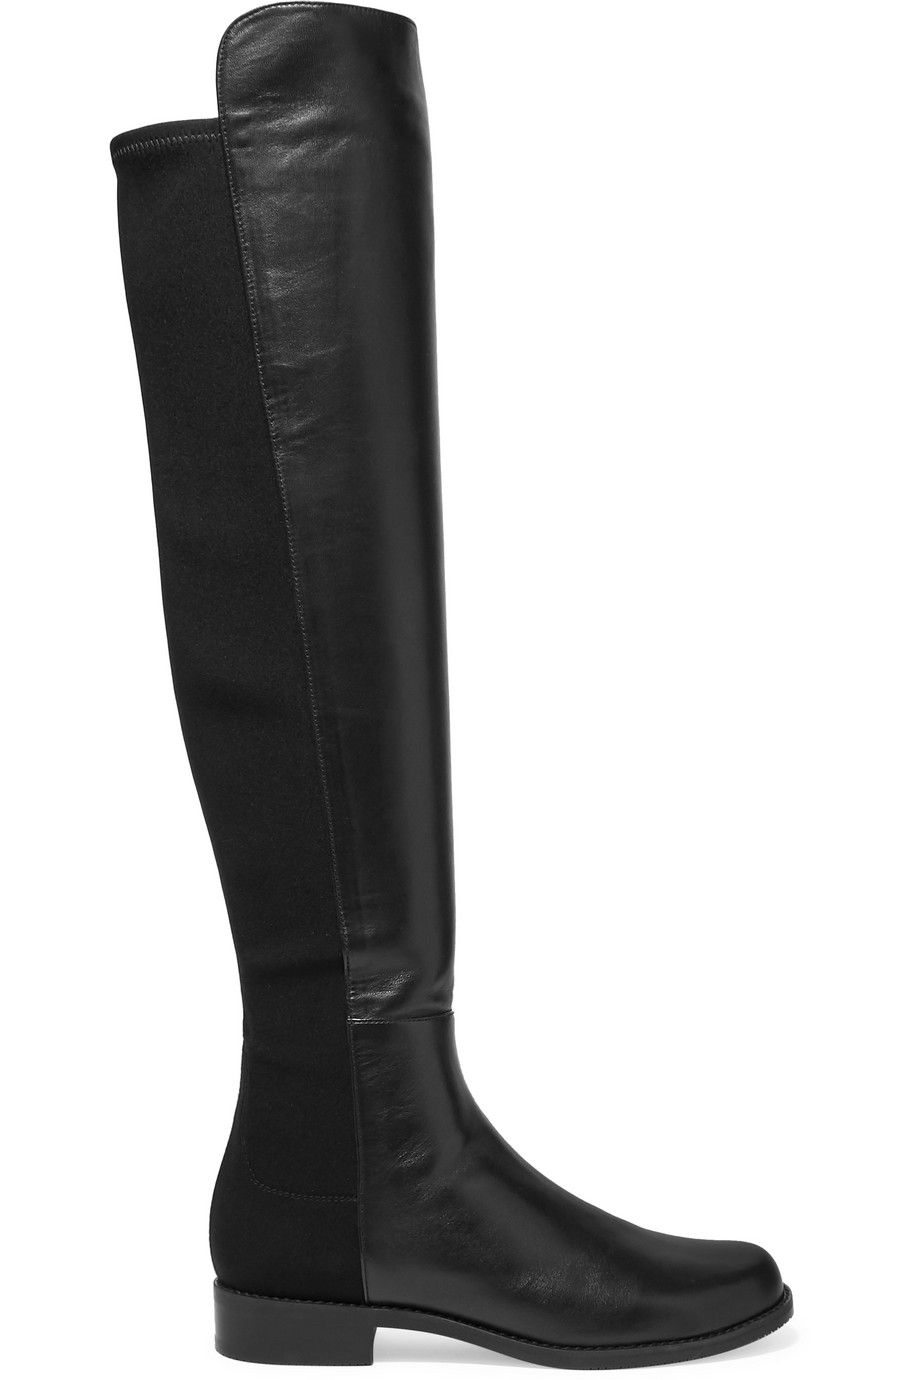 5050 leather and neoprene knee boots